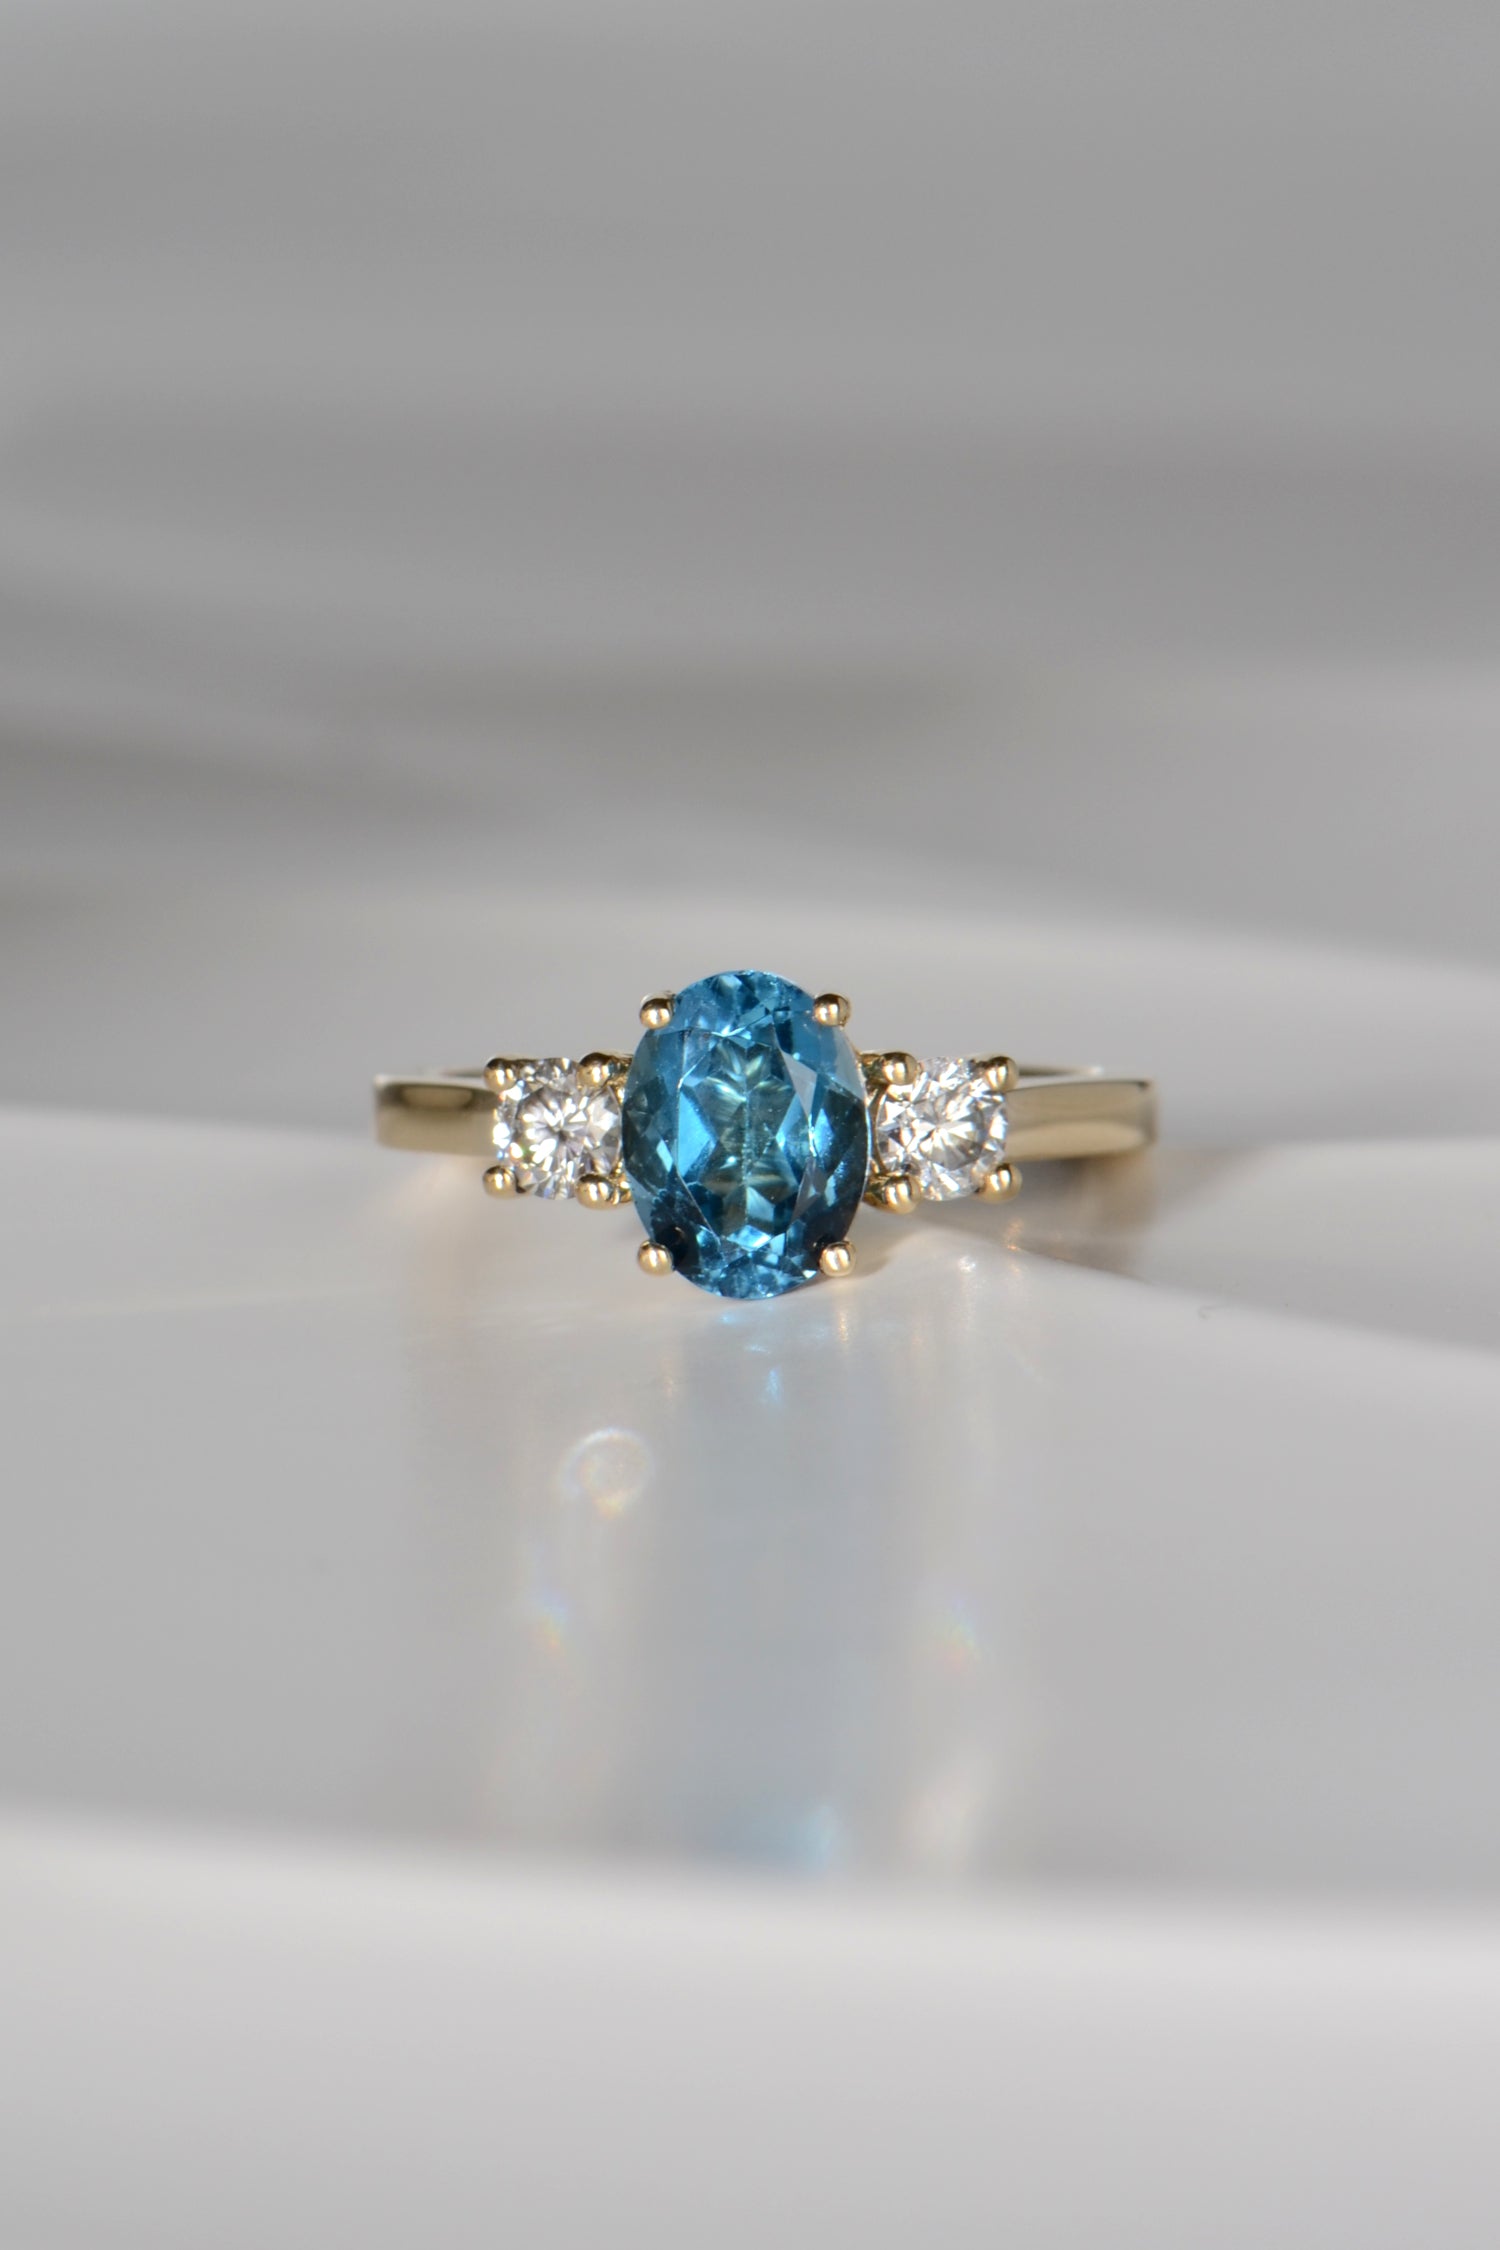 Amazon.com: Blue Topaz Ring - December Birthstone - London Blue Topaz Ring  - Gold Ring - Emerald Cut Ring - Blue Topaz Engagement Ring - Cocktail Ring  : Handmade Products